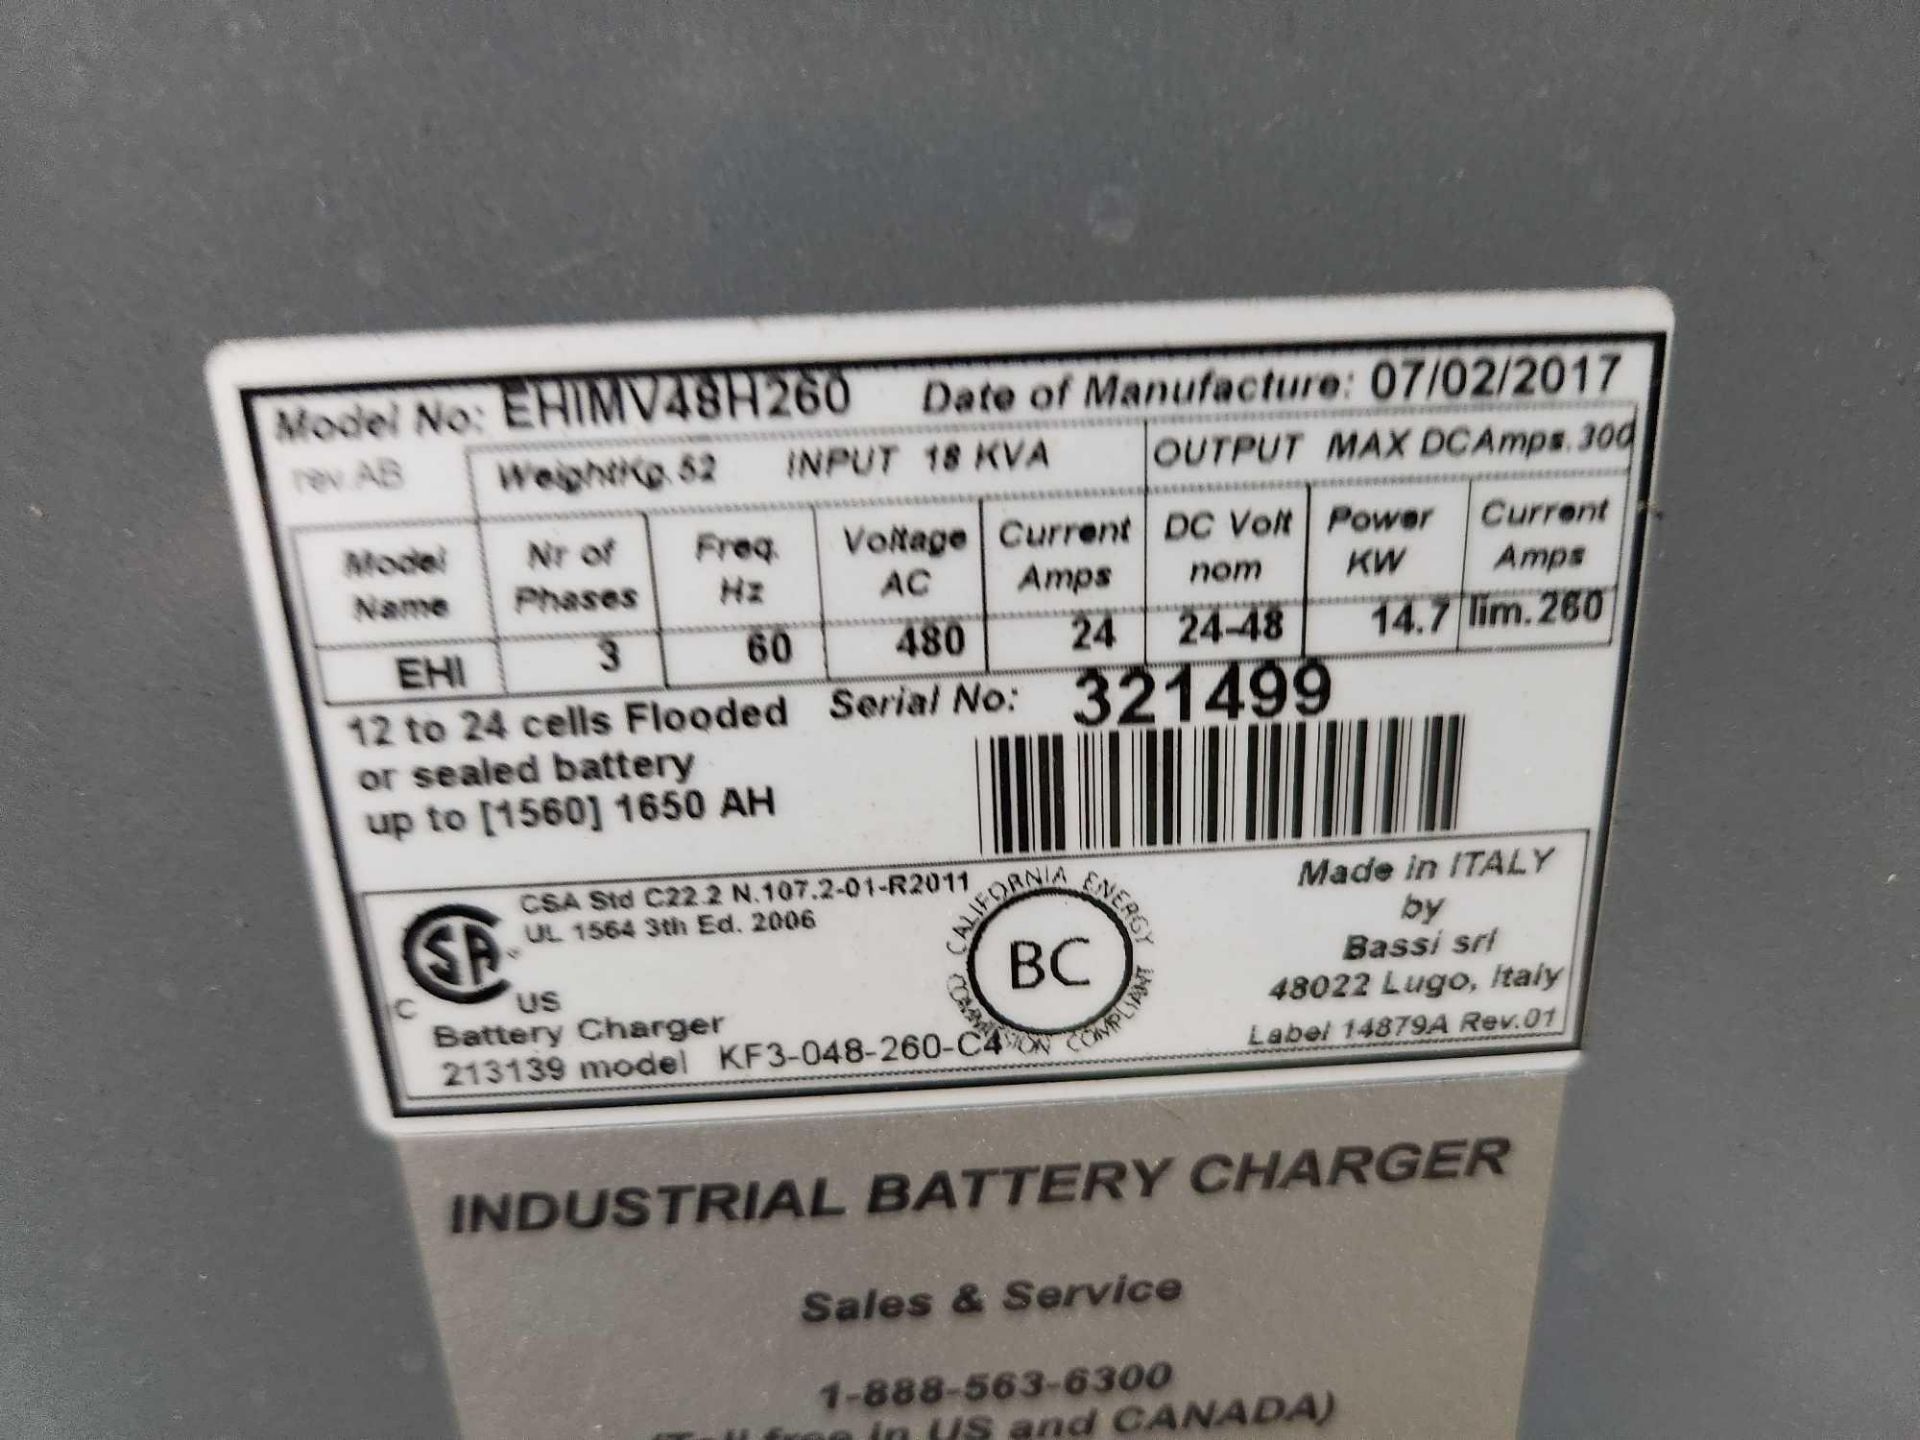 2017 GNB battery charger, mn EHIMV48H260, 3 phase with stand (CHARGER 3) (WAREHOUSE) - Image 3 of 3